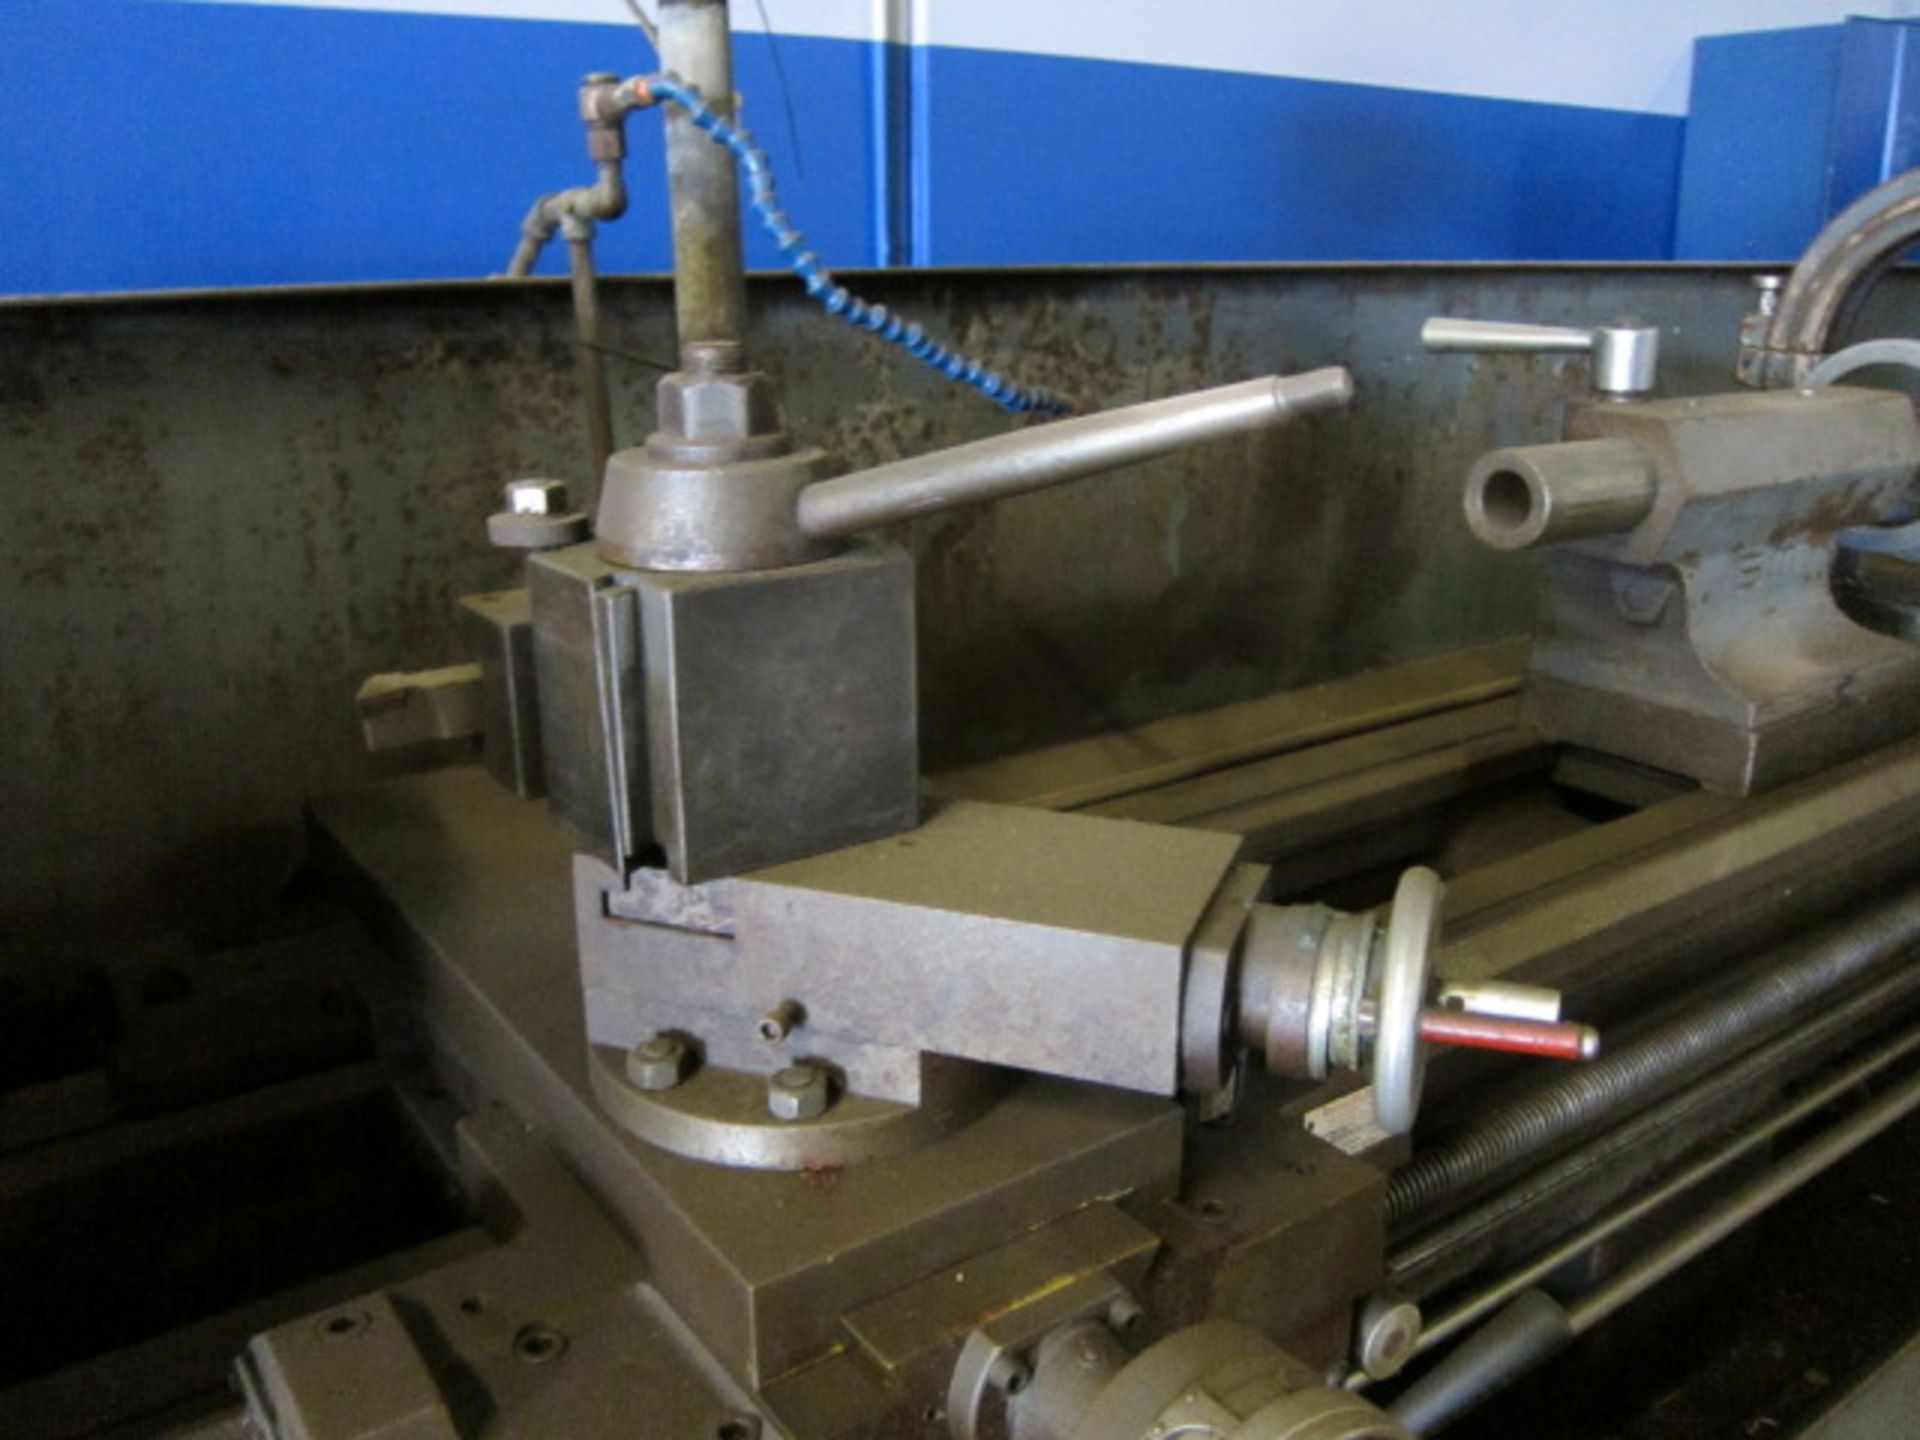 ENGINE LATHE, STANDARD MODERN 20” X 120”, spds: 27-1600 RPM, 3.15” spdl. hole, taper attach., 2-axis - Image 4 of 8